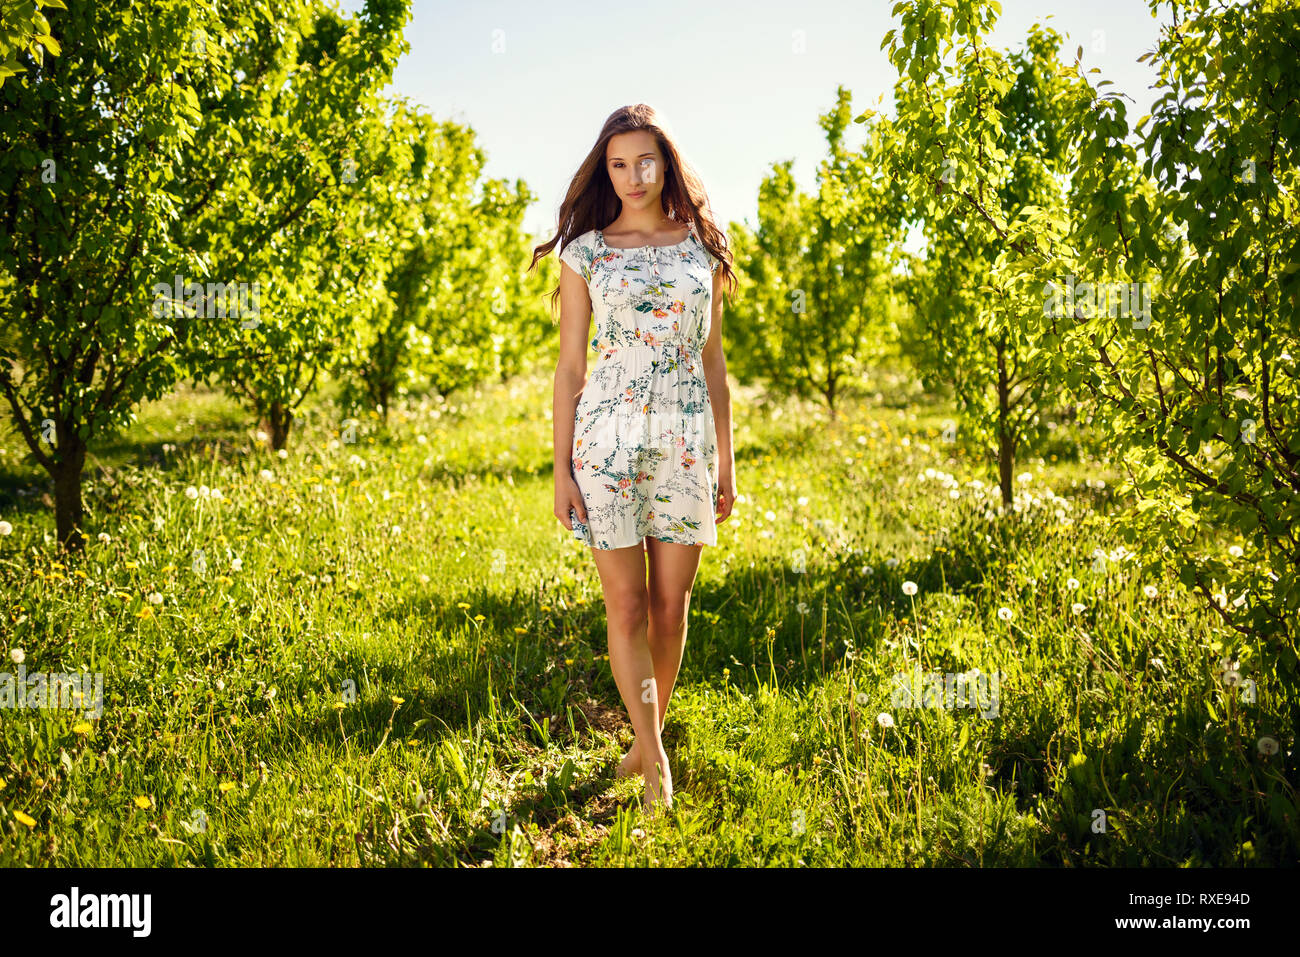 A beautiful girl in an airy dress taking a walk between fruit trees. Stock Photo